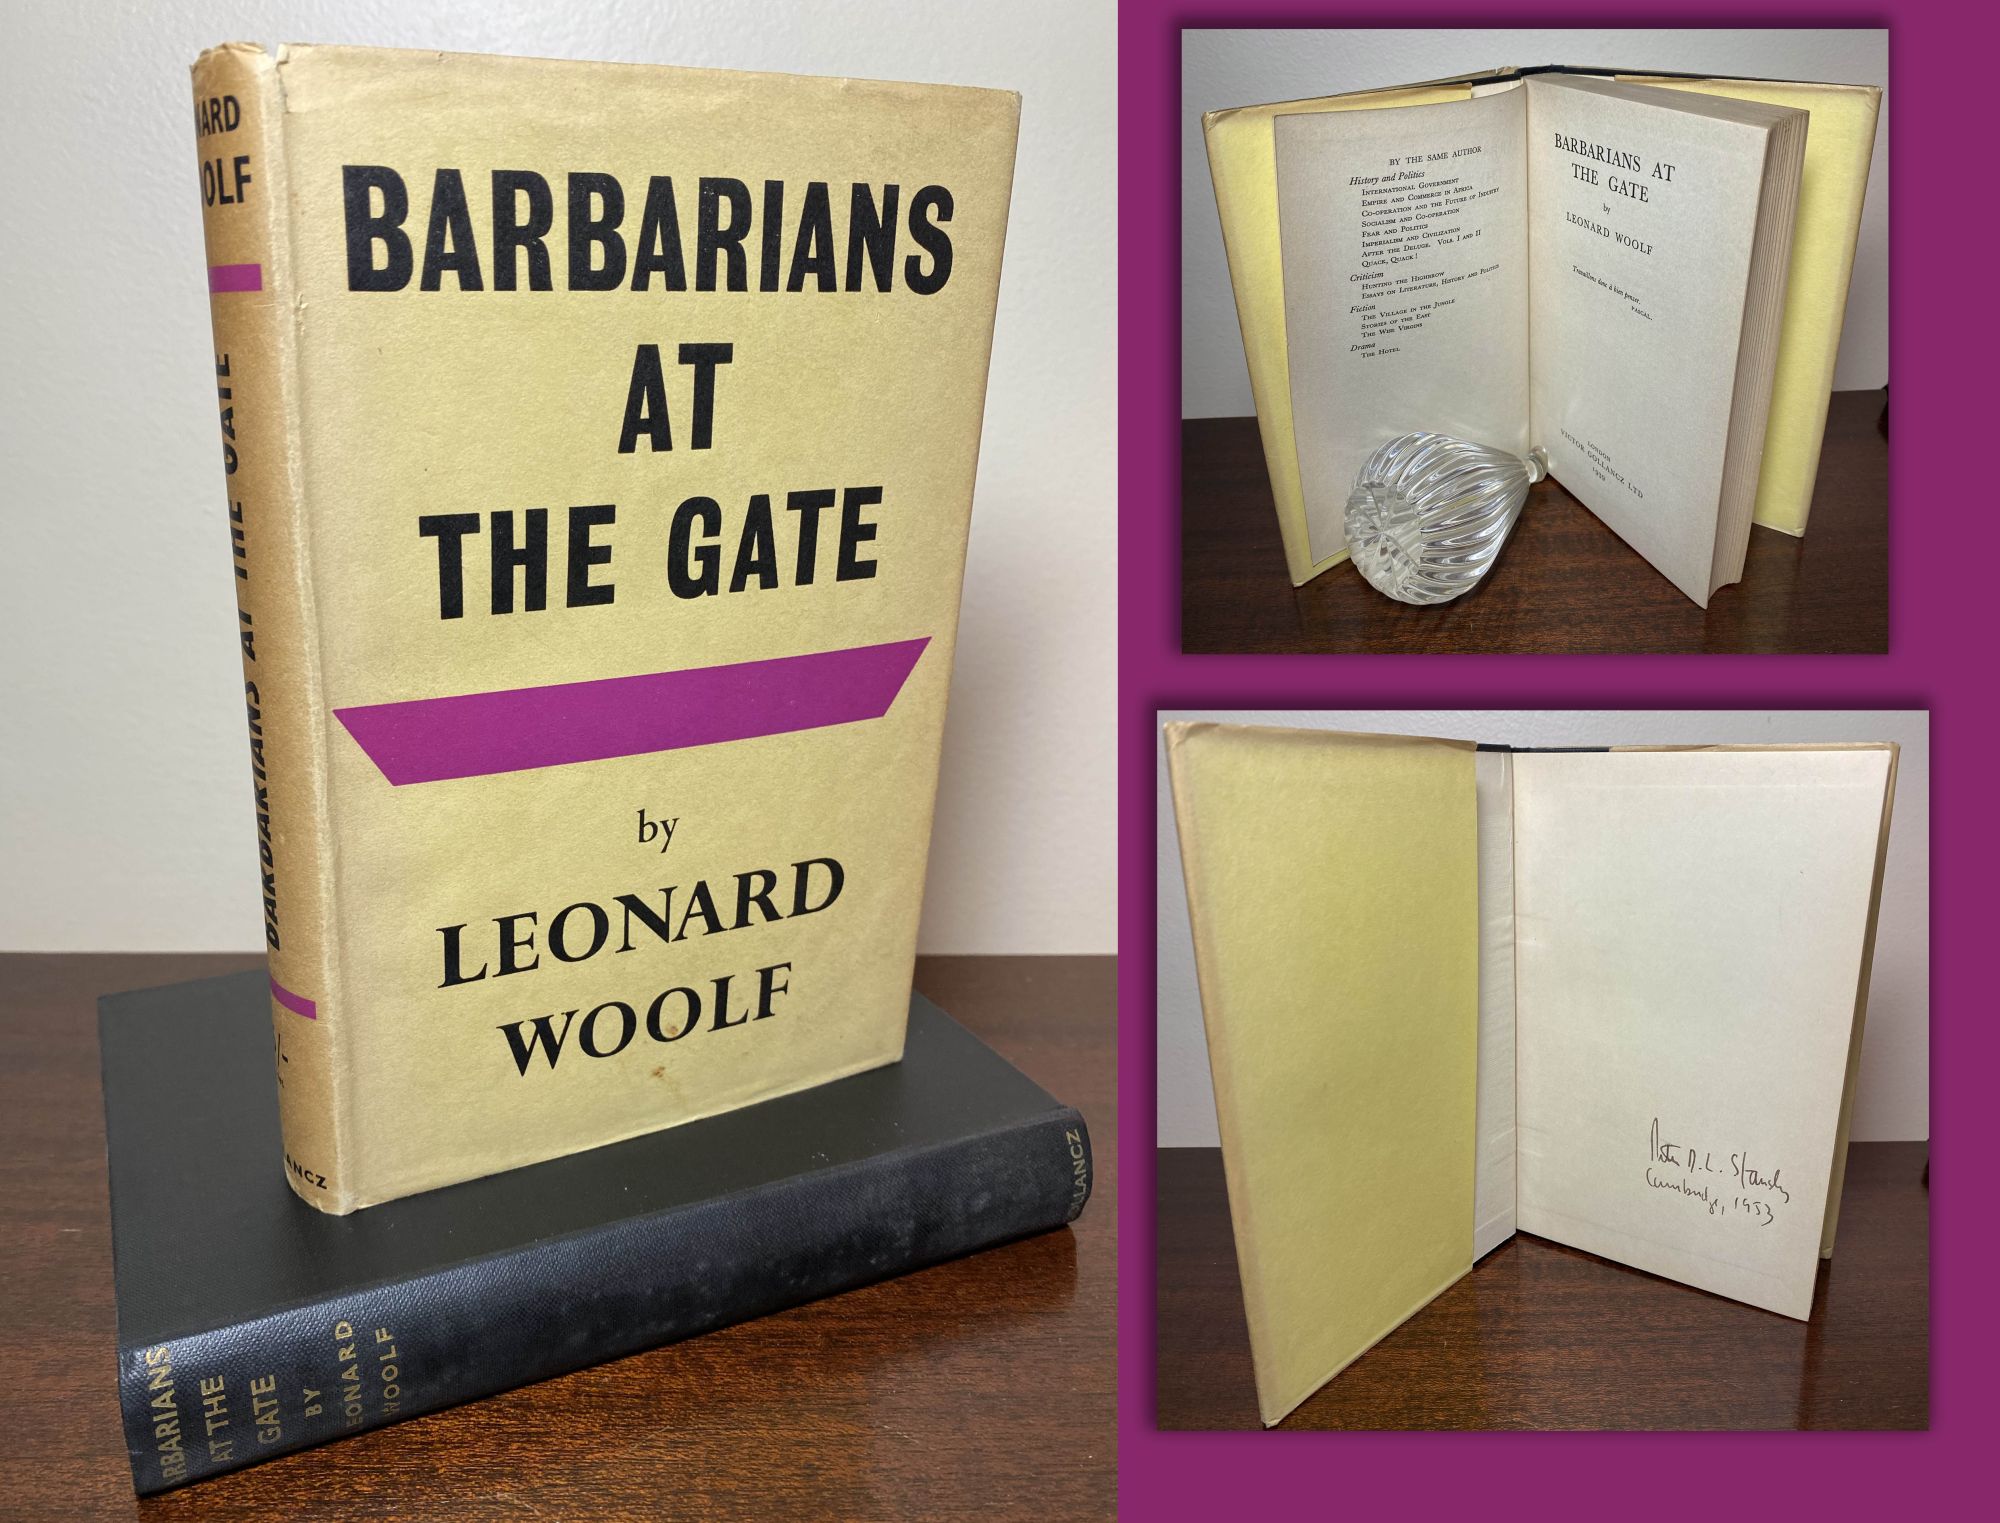 Woolf, Leonard. [Peter Stansky] - Barbarians at the Gate. - Peter Stansky's Copy